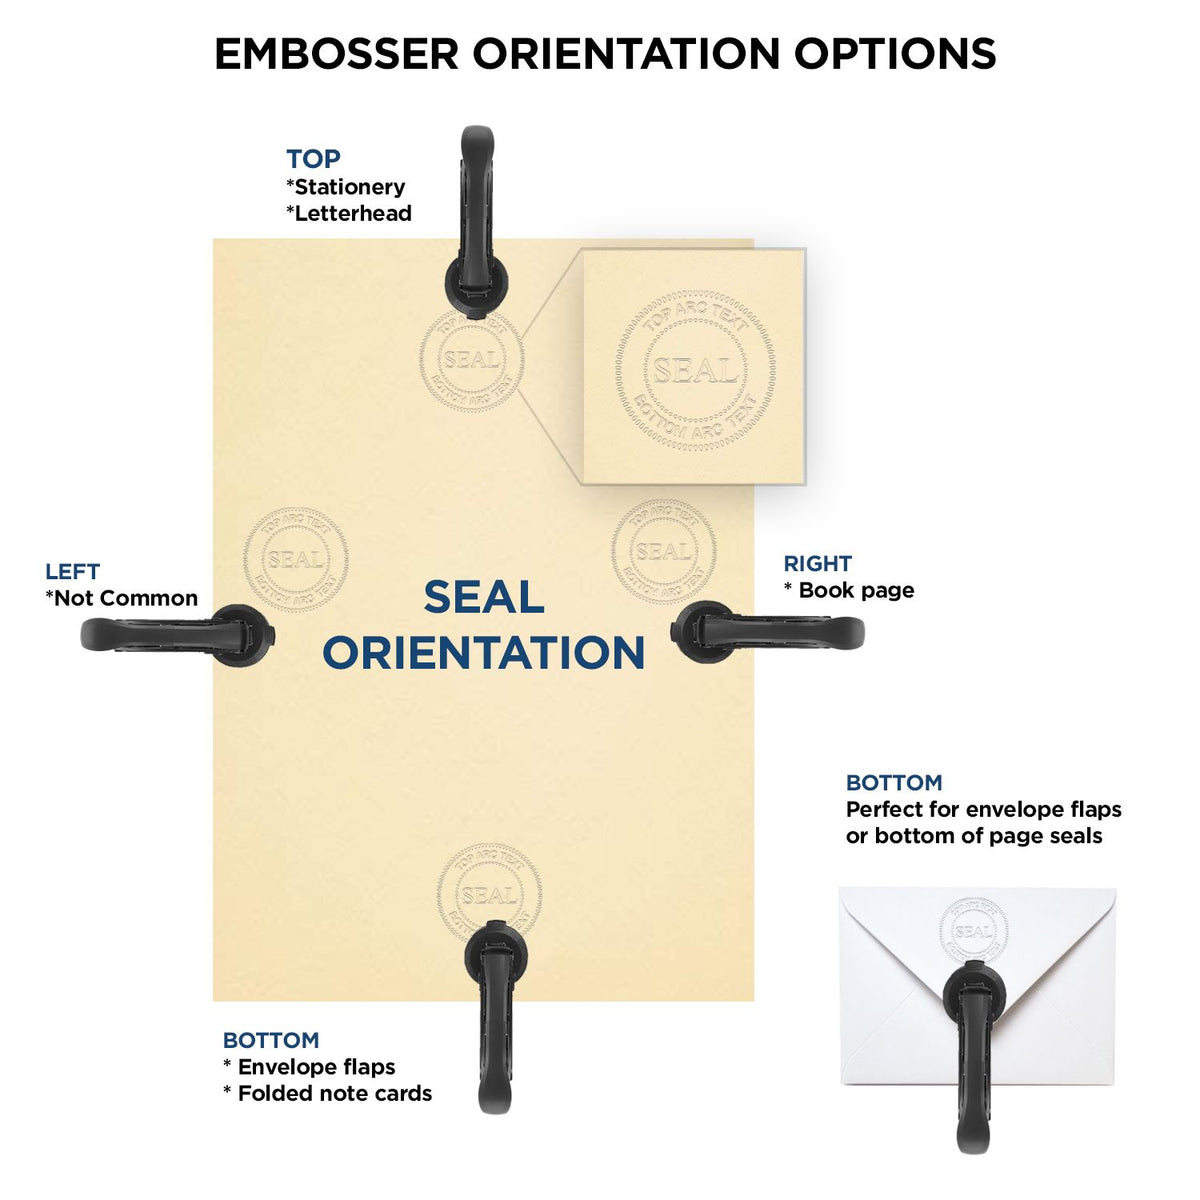 An infographic for the Handheld District of Columbia Land Surveyor Seal showing embosser orientation, this is showing examples of a top, bottom, right and left insert.